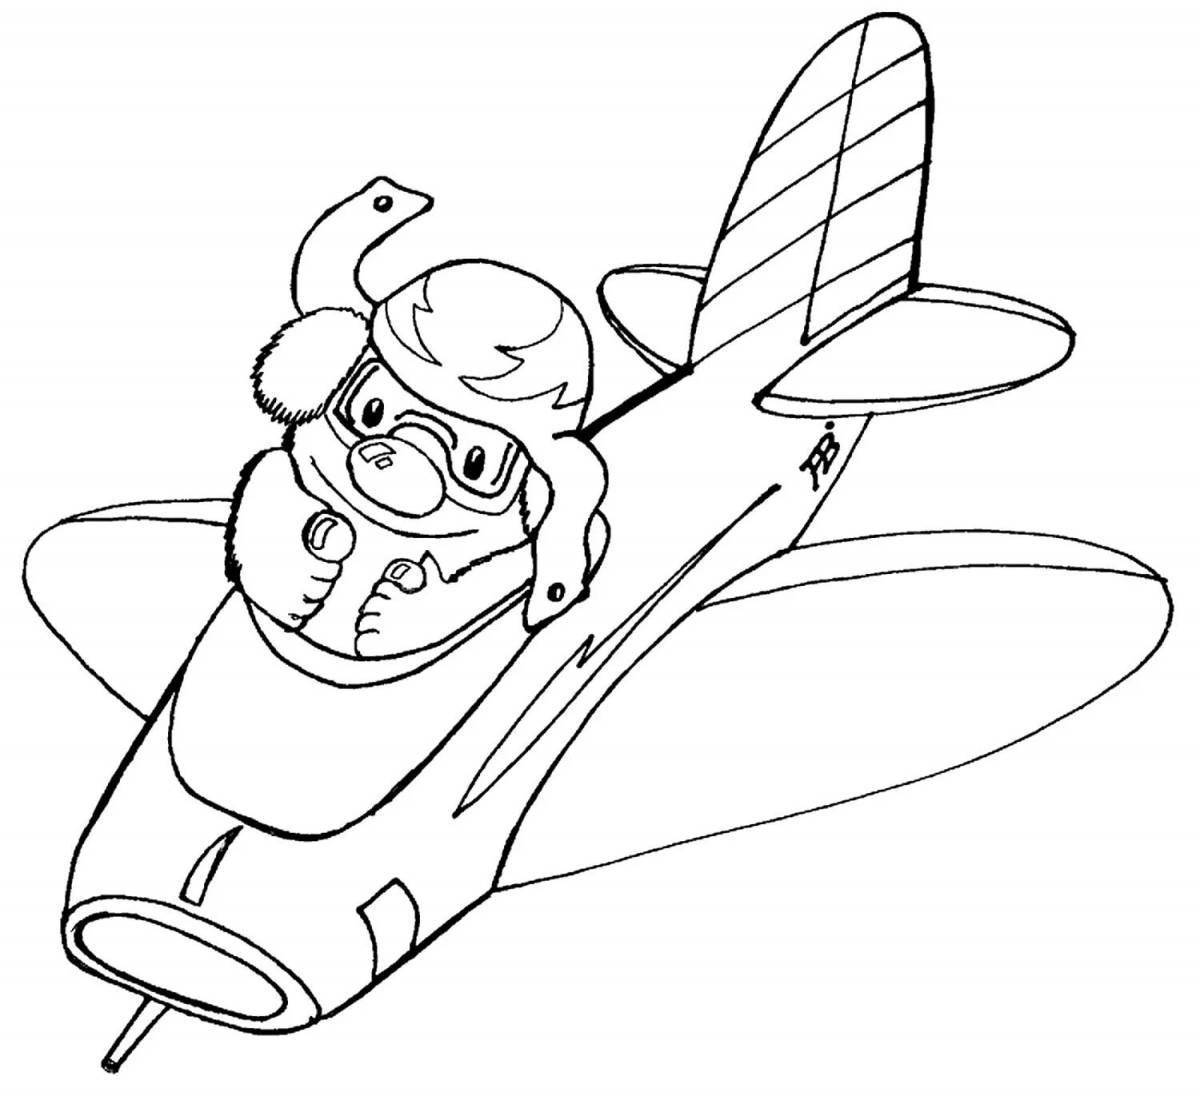 Animated pilot coloring page